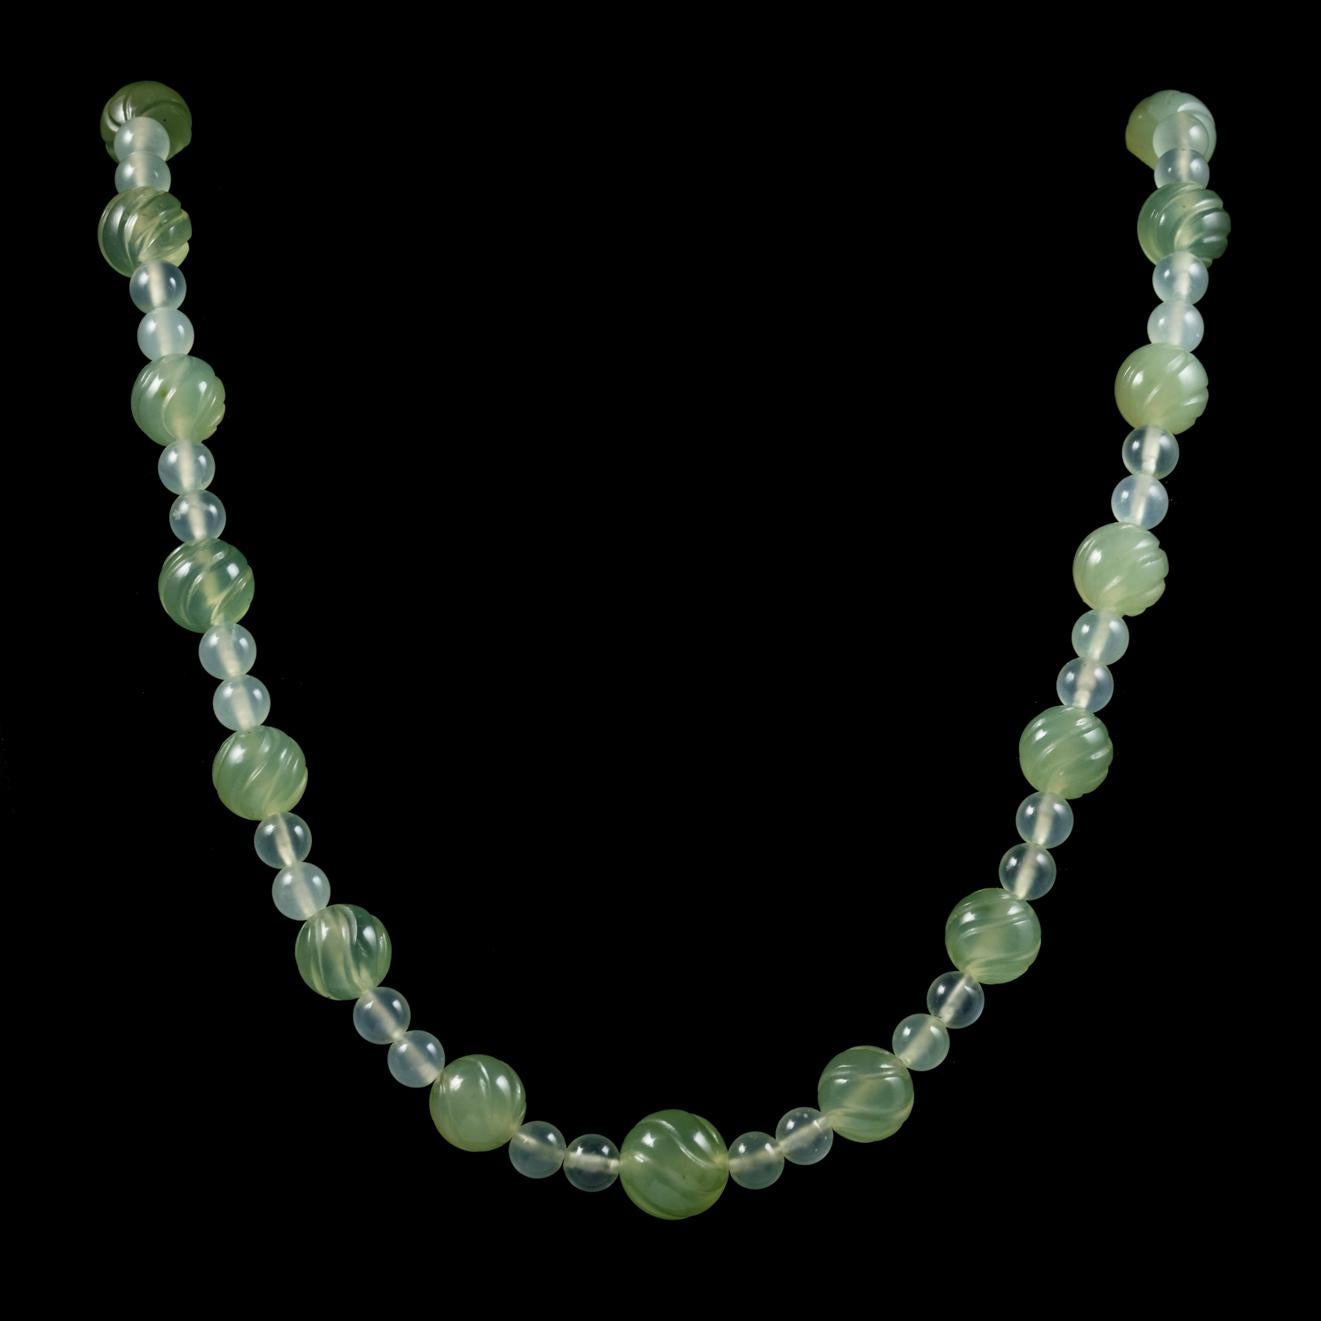 This magnificent long antique Beaded Serpentine necklace is from the Victorian era, Circa 1900. The lovely necklace features apple green Serpentine beads which alternate in size with larger engraved beads decorated throughout. Serpentine derives its